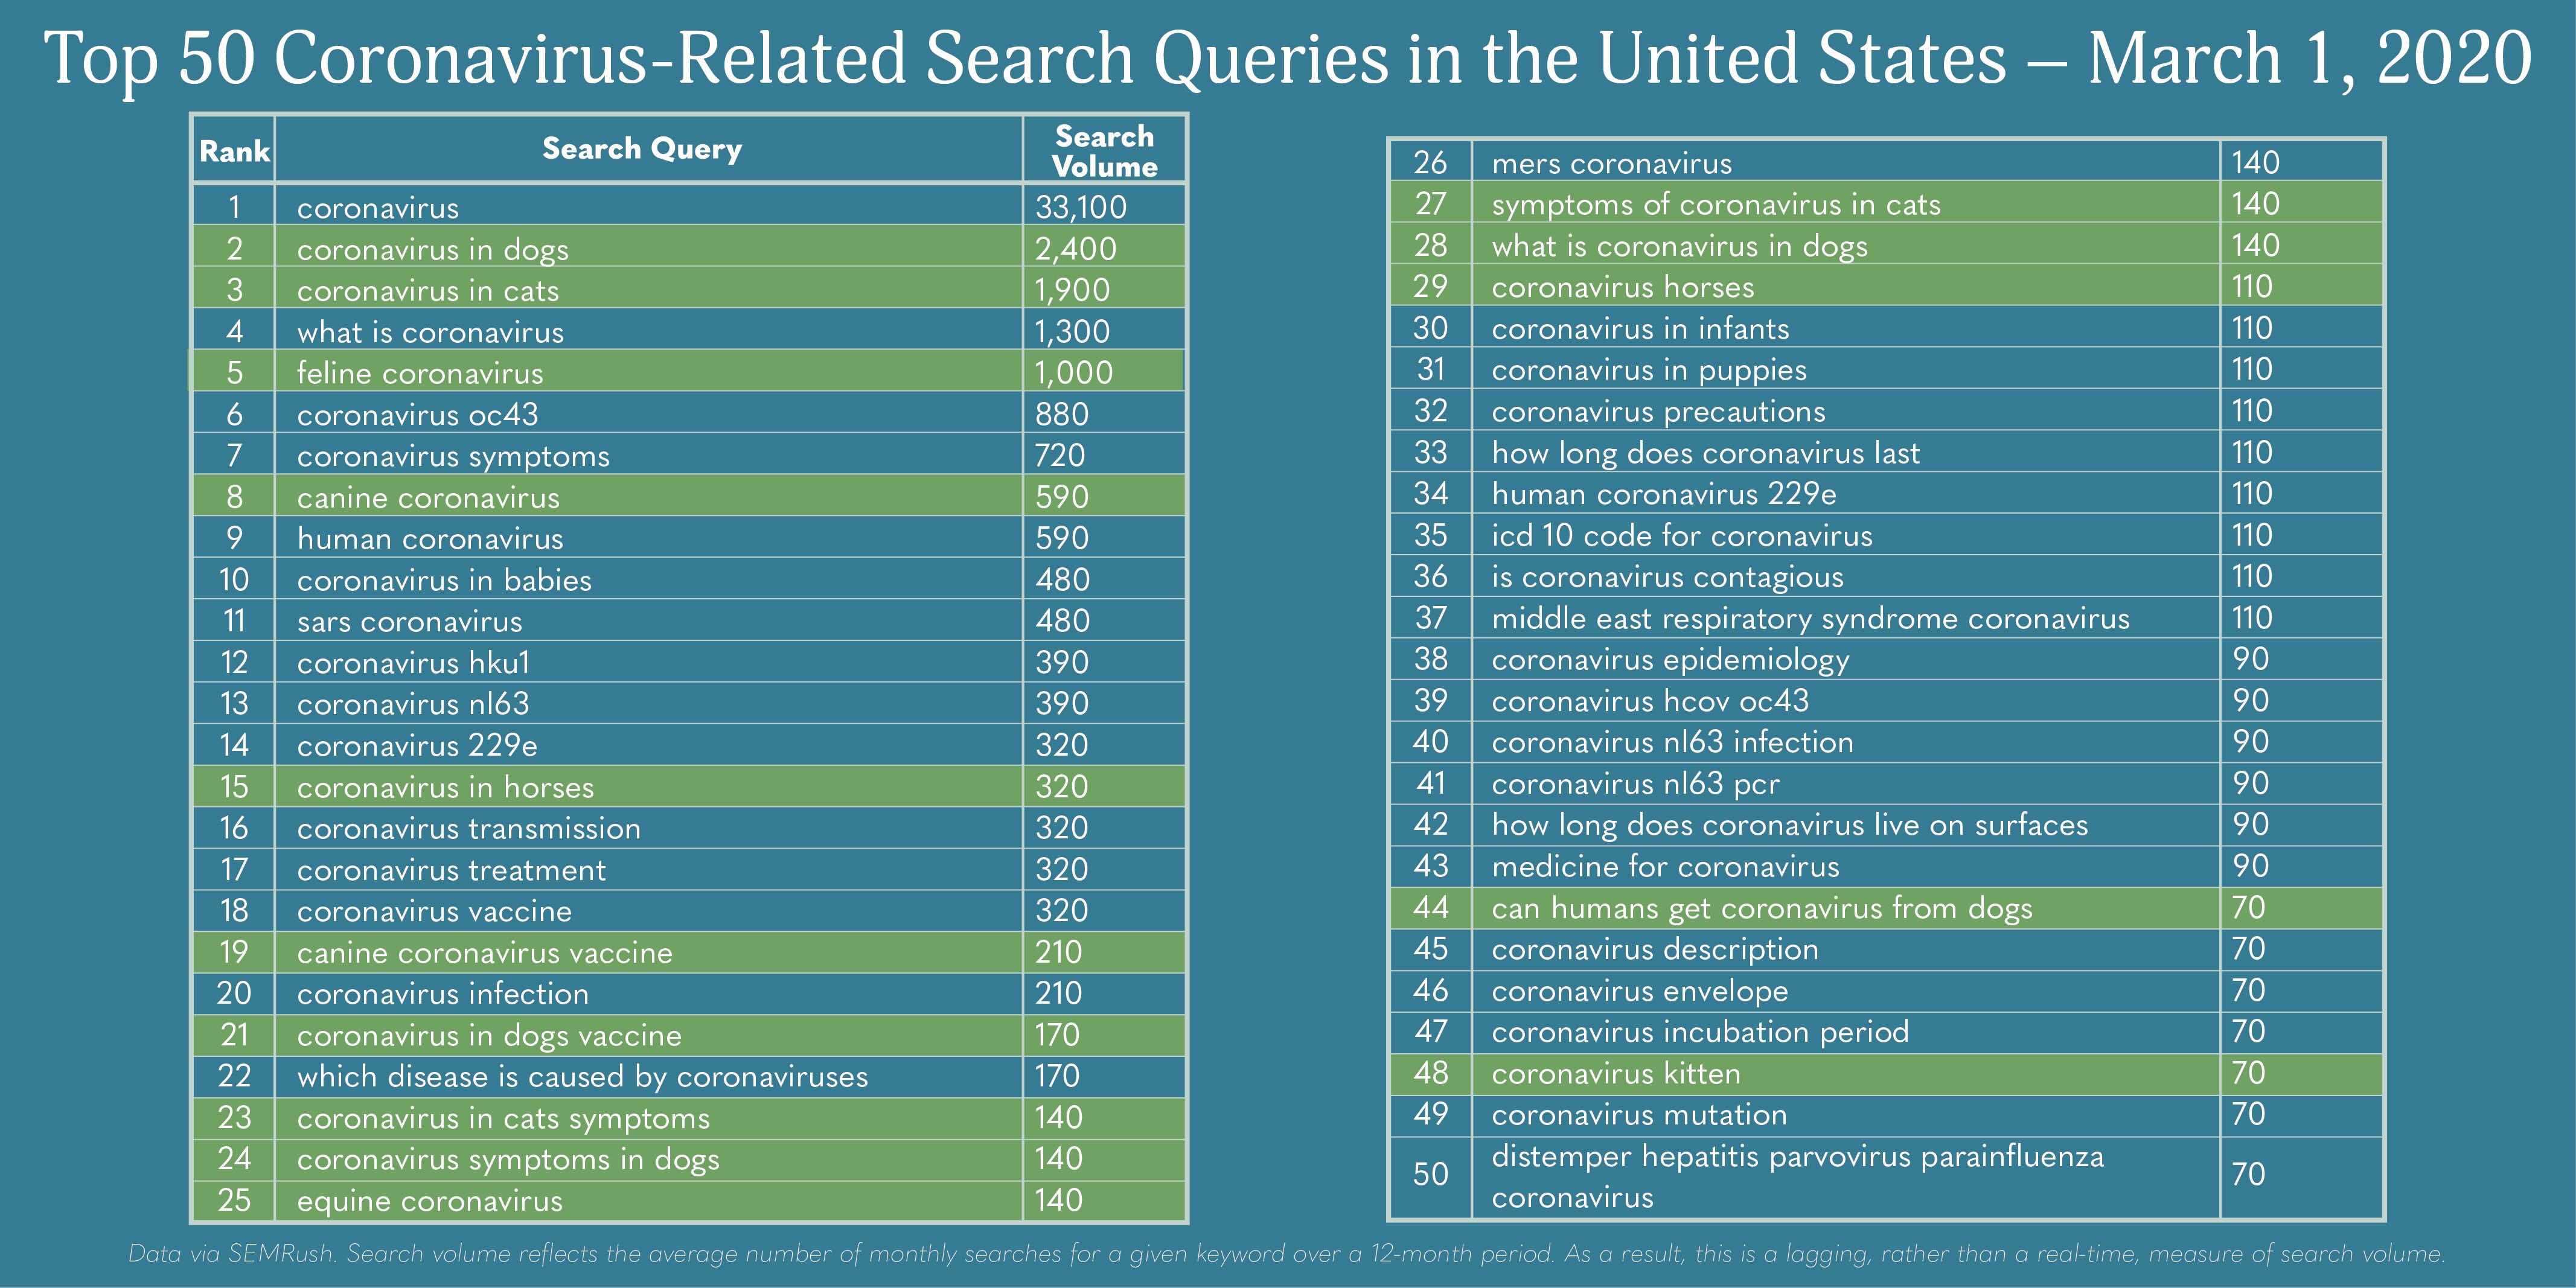 coronavirus-related search queries from March 1